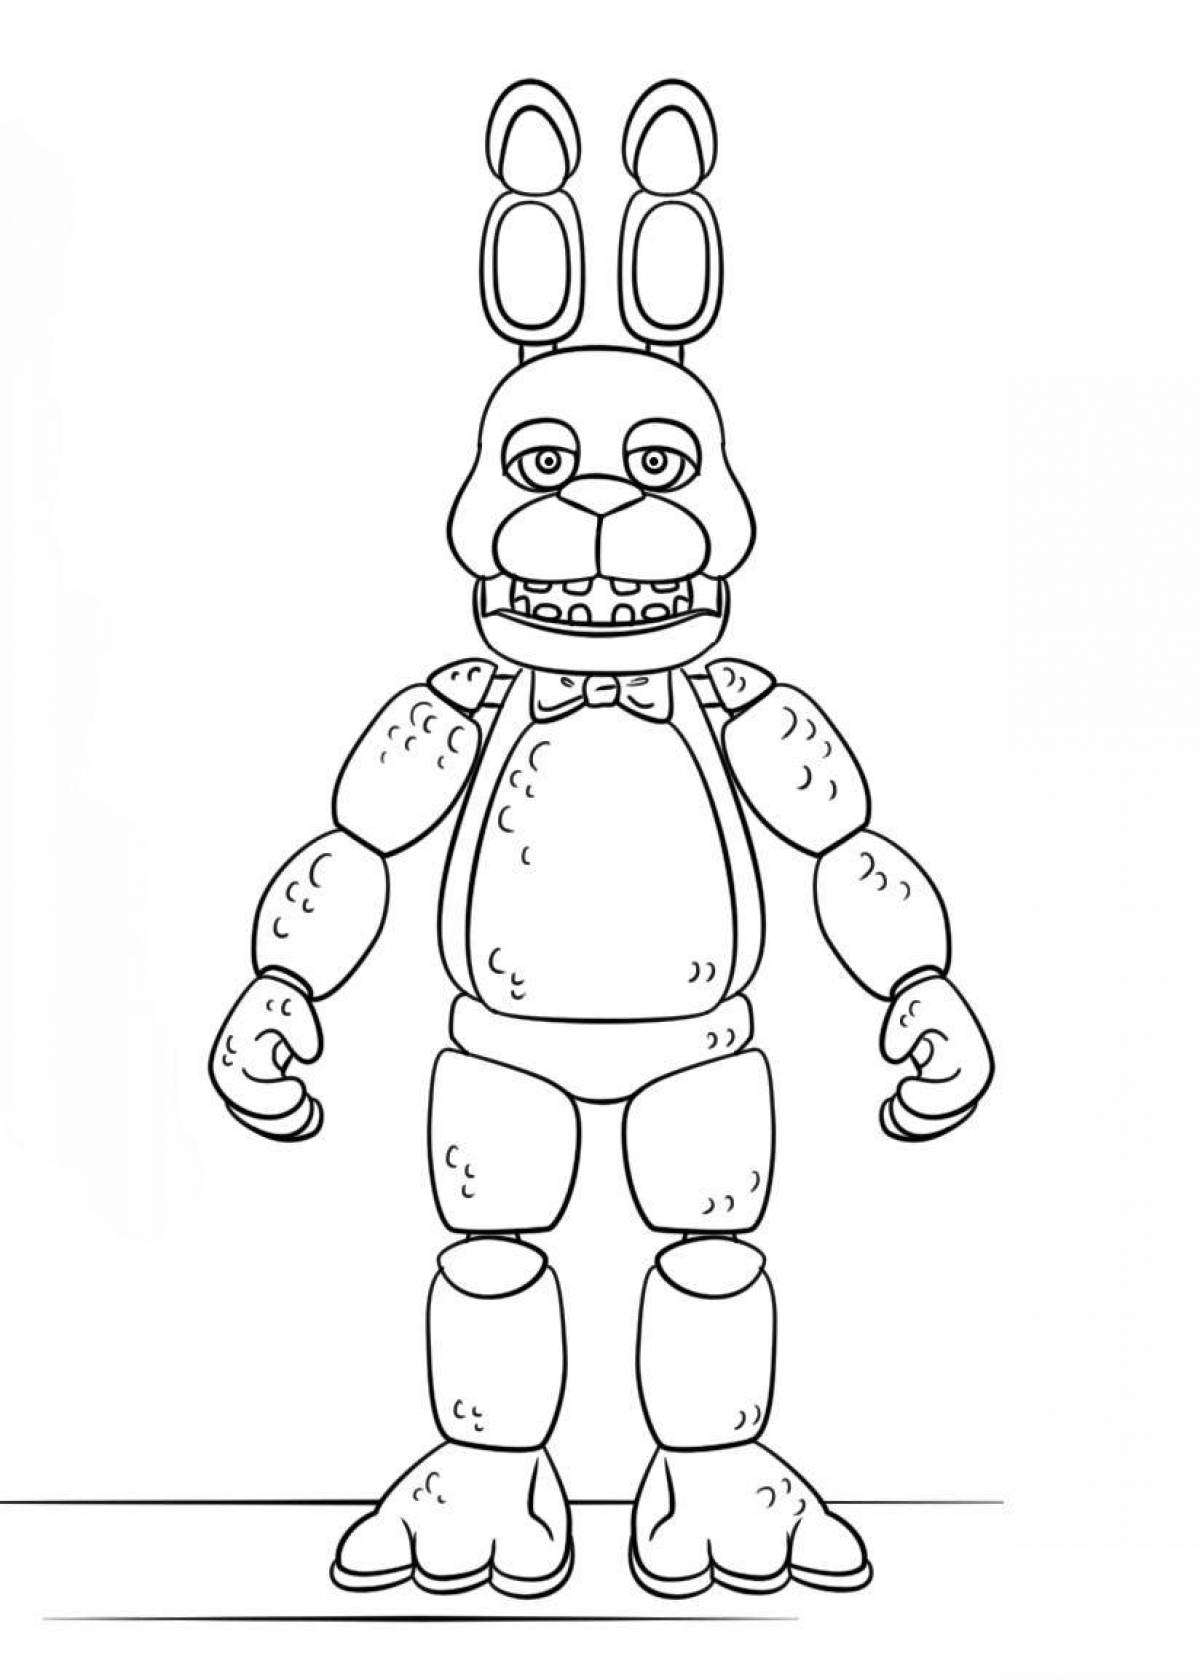 Exciting freddy robot coloring page